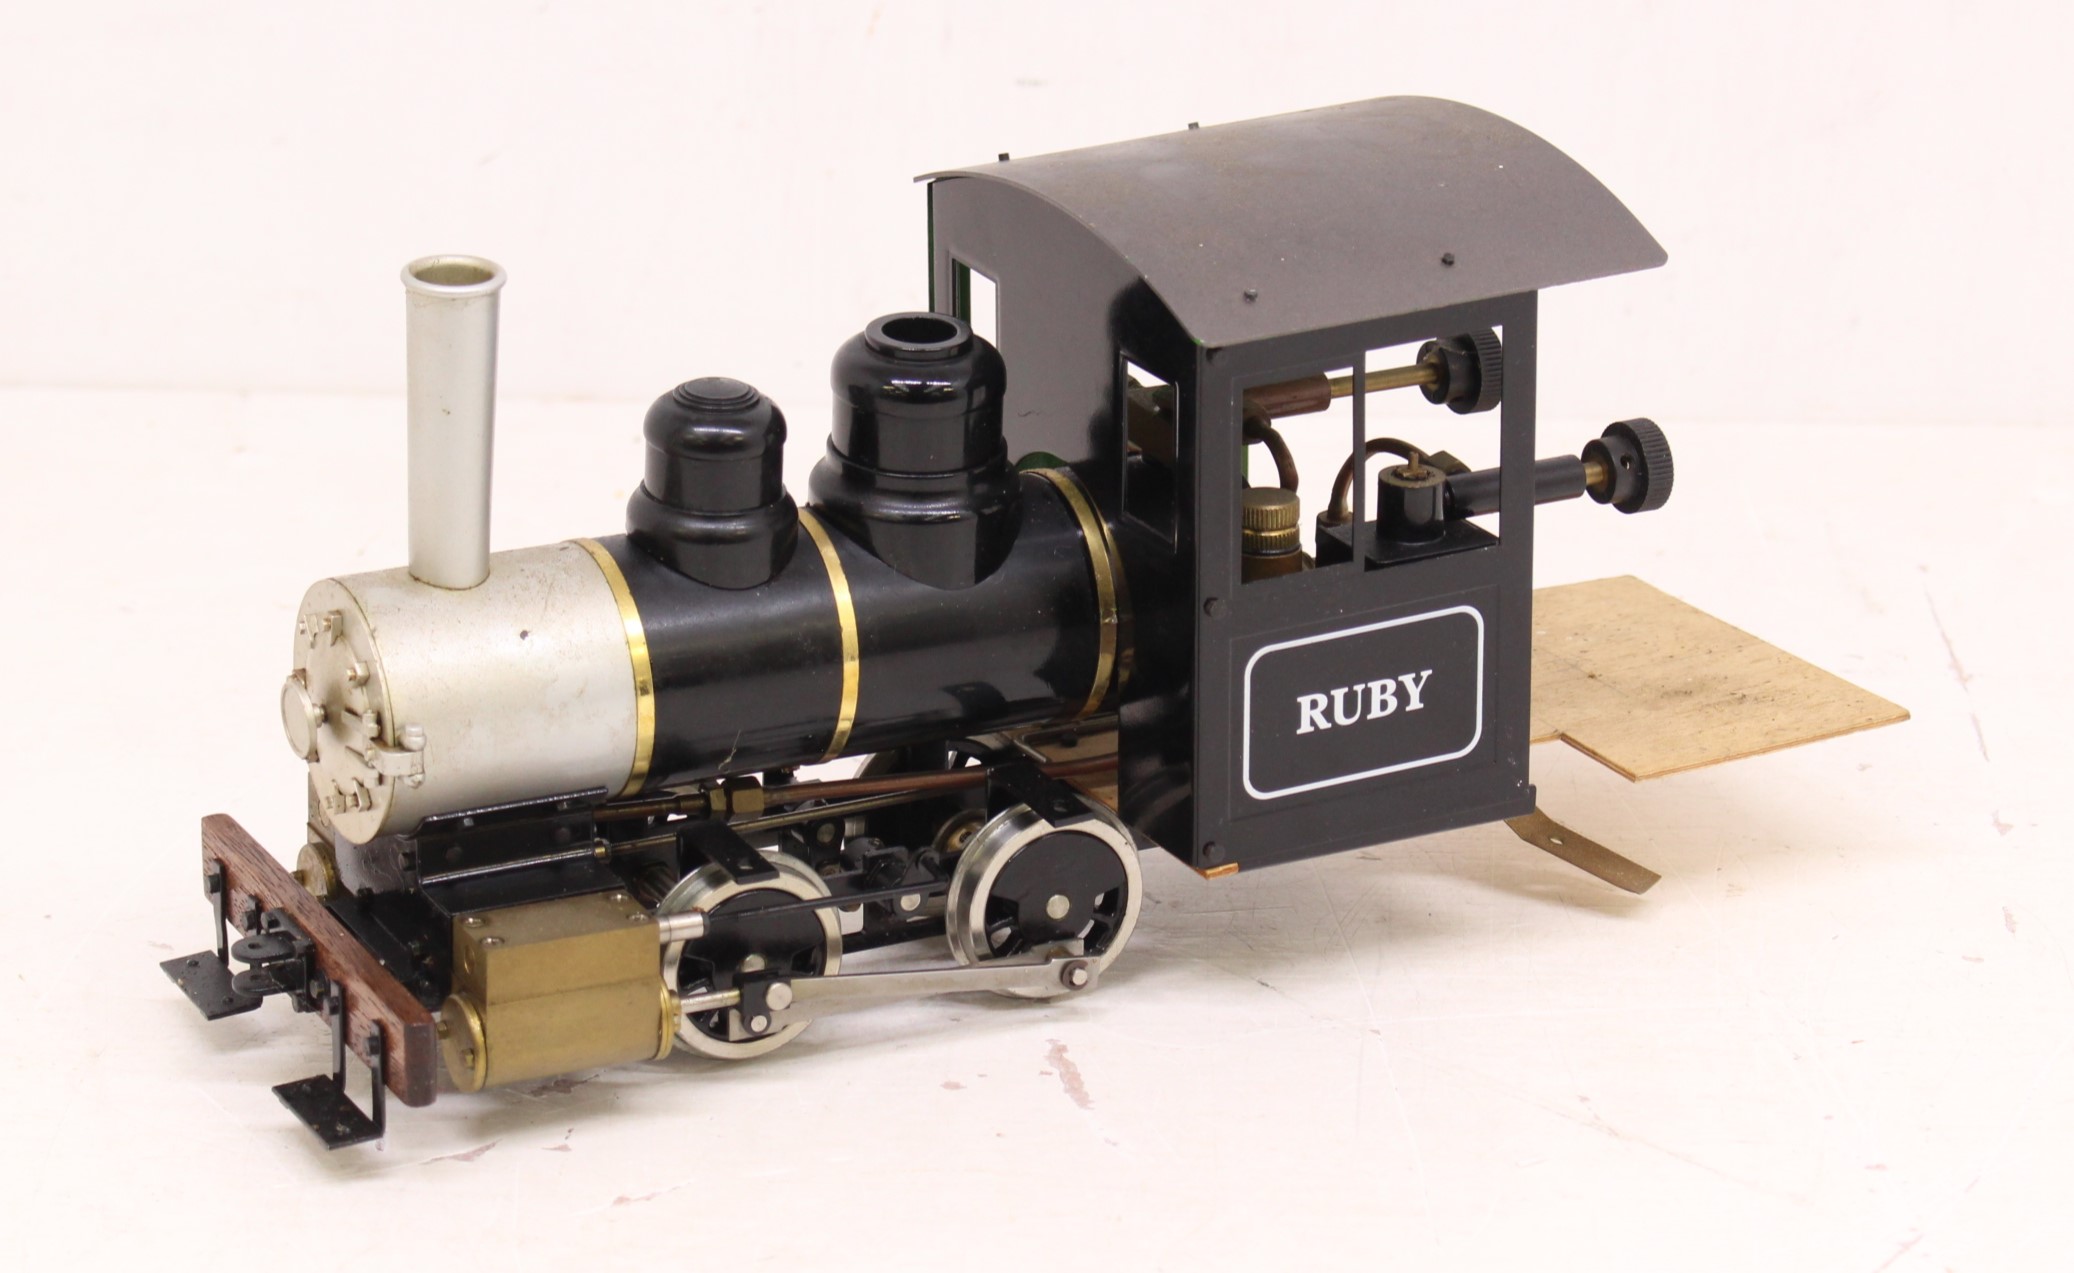 Accucraft: An Accucraft part-built Ruby locomotive, 45mm Scale. General wear expected with age. Used